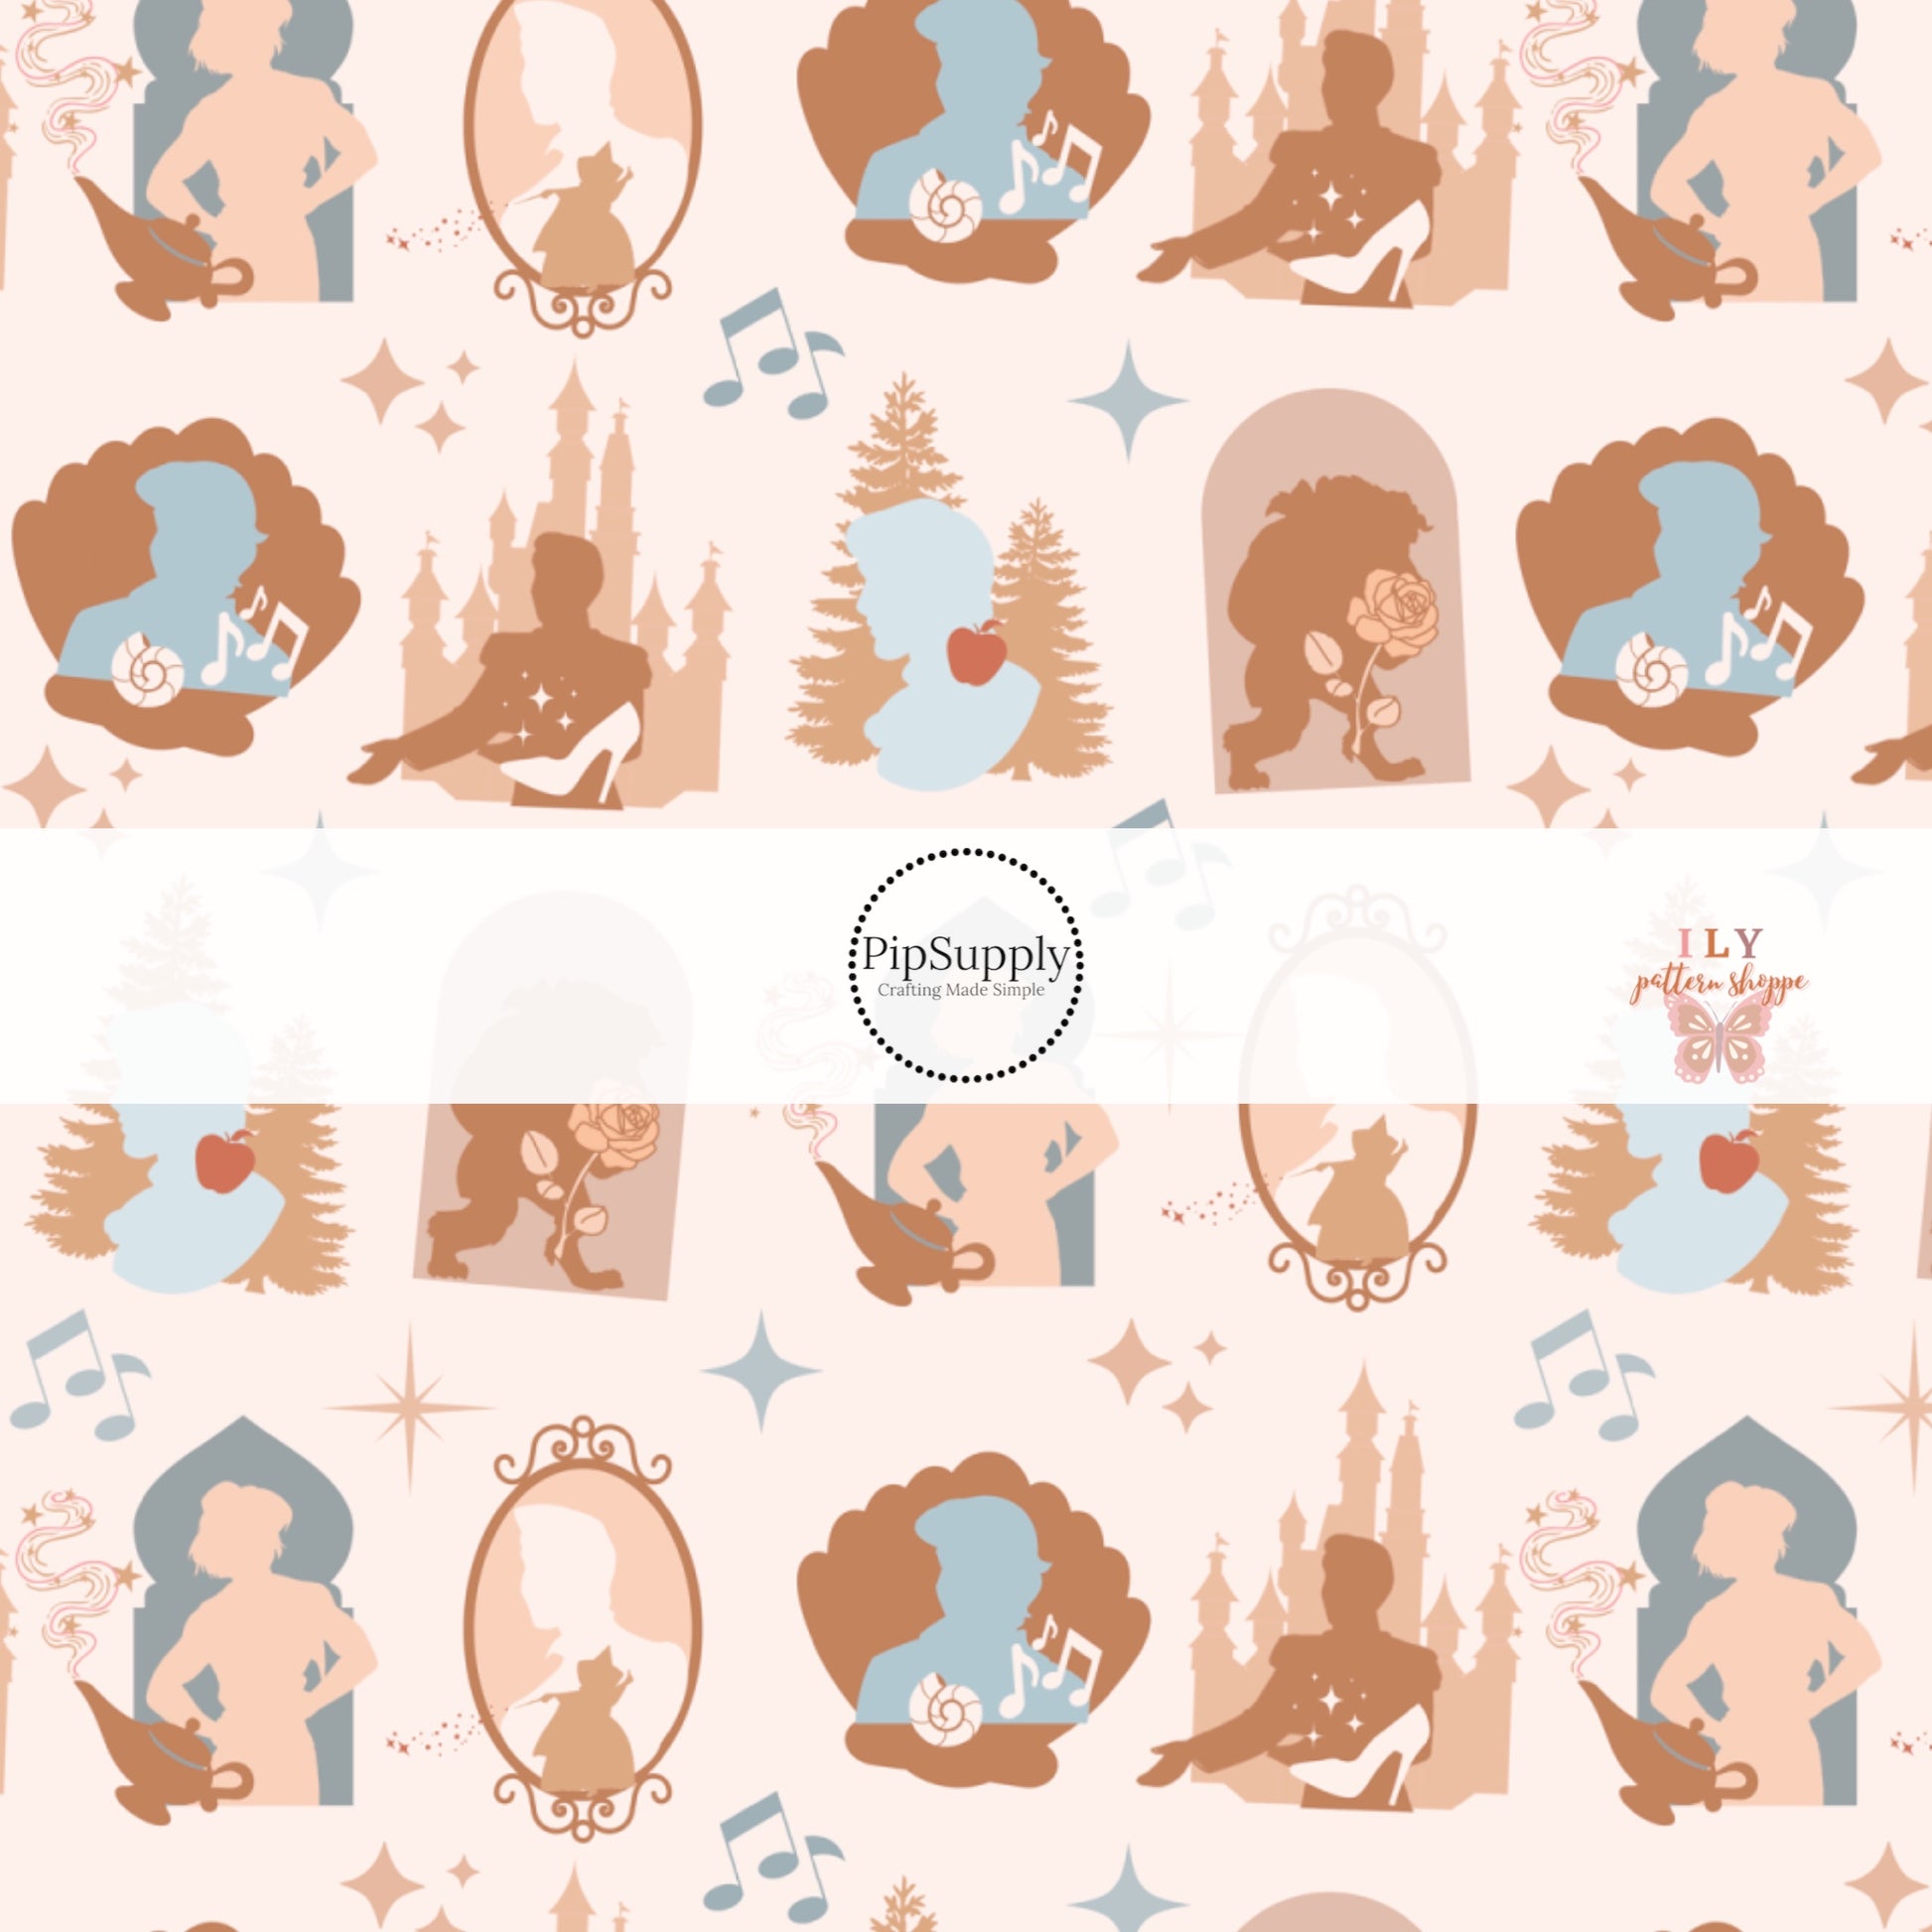 Light blush fabric by the yard with blue and pink prince silhouettes, musical notes, and stars - Custom printed fabric 